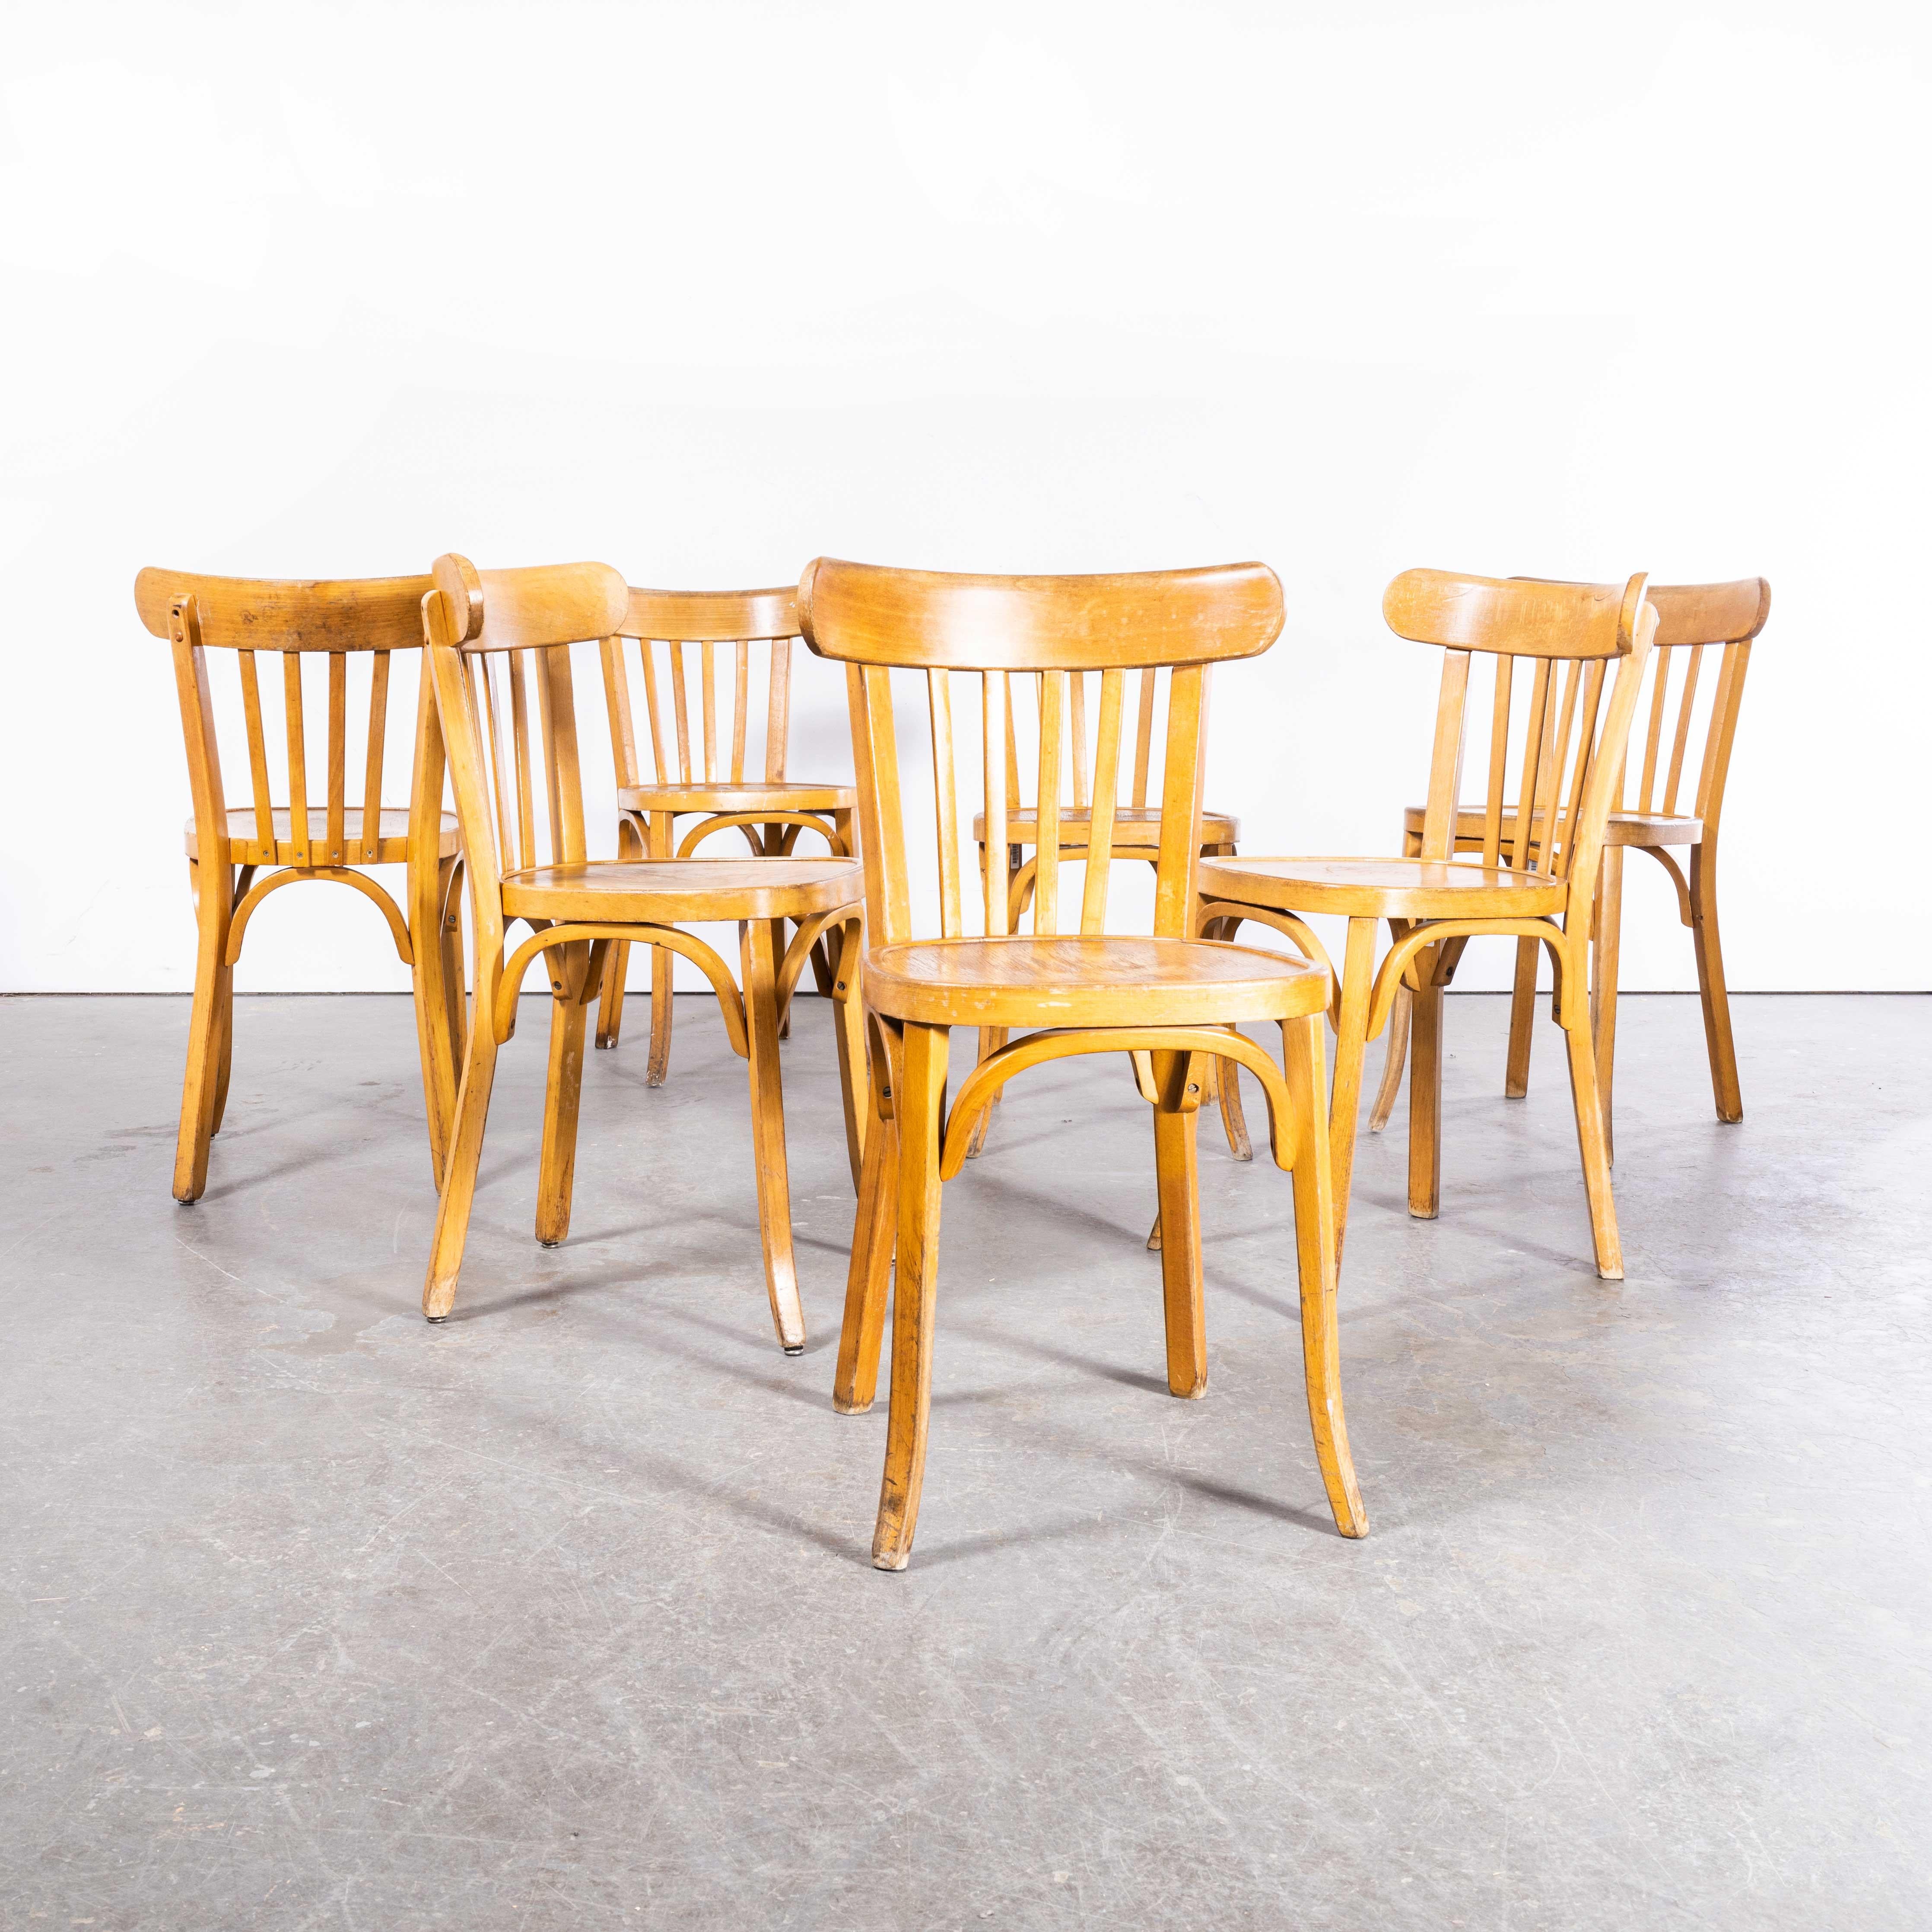 1950s Baumann Blonde Bentwood Café Dining Chair – Set Of Seven
1950s Baumann Blonde Bentwood Café Dining Chair – Set Of Seven. Made by the maker Baumann. Baumann is a slightly off the radar French producer just starting to gain traction in the